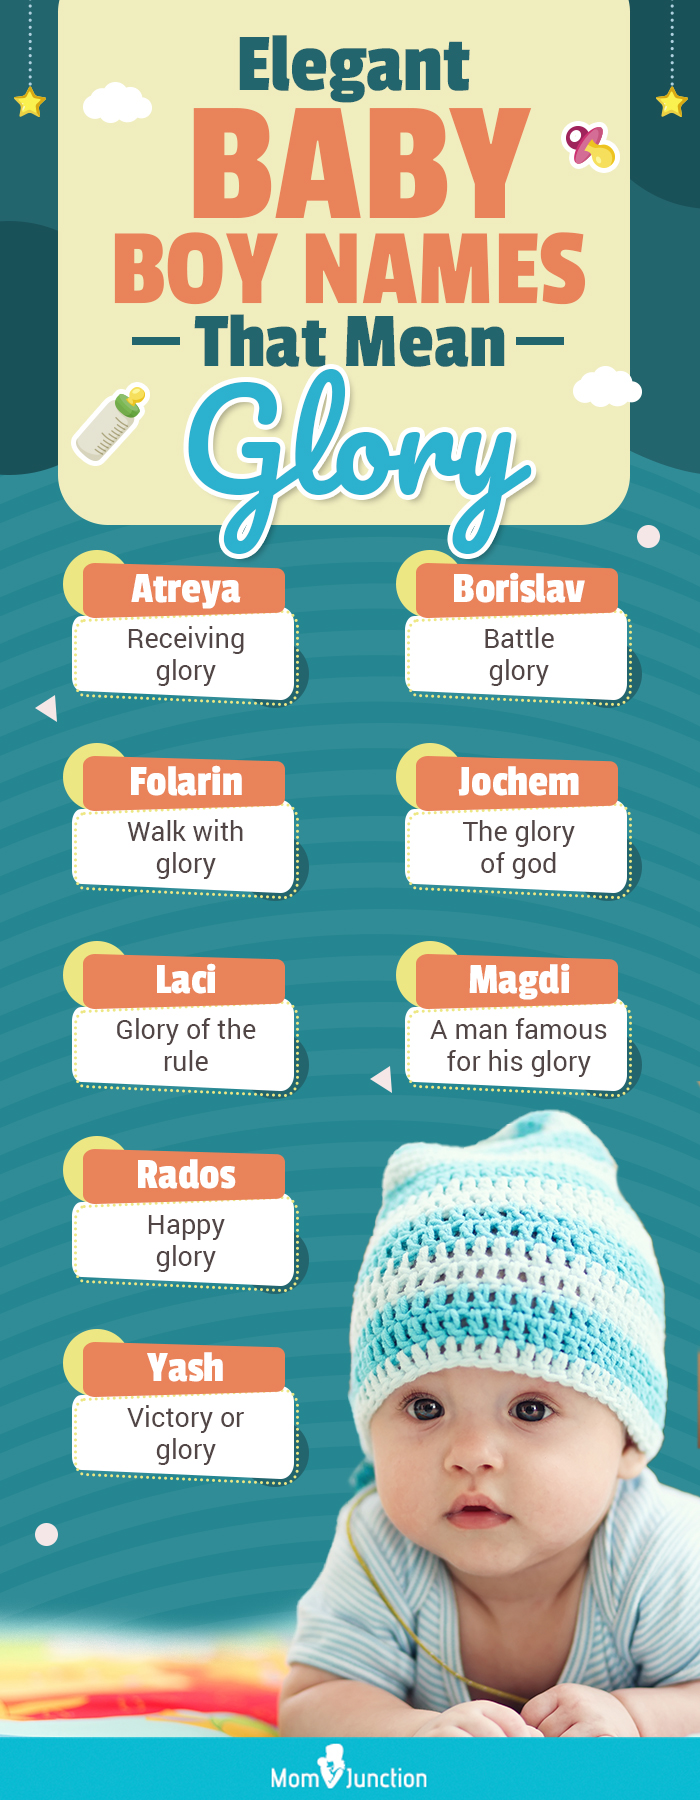 elegant baby boy names that mean glory (infographic)